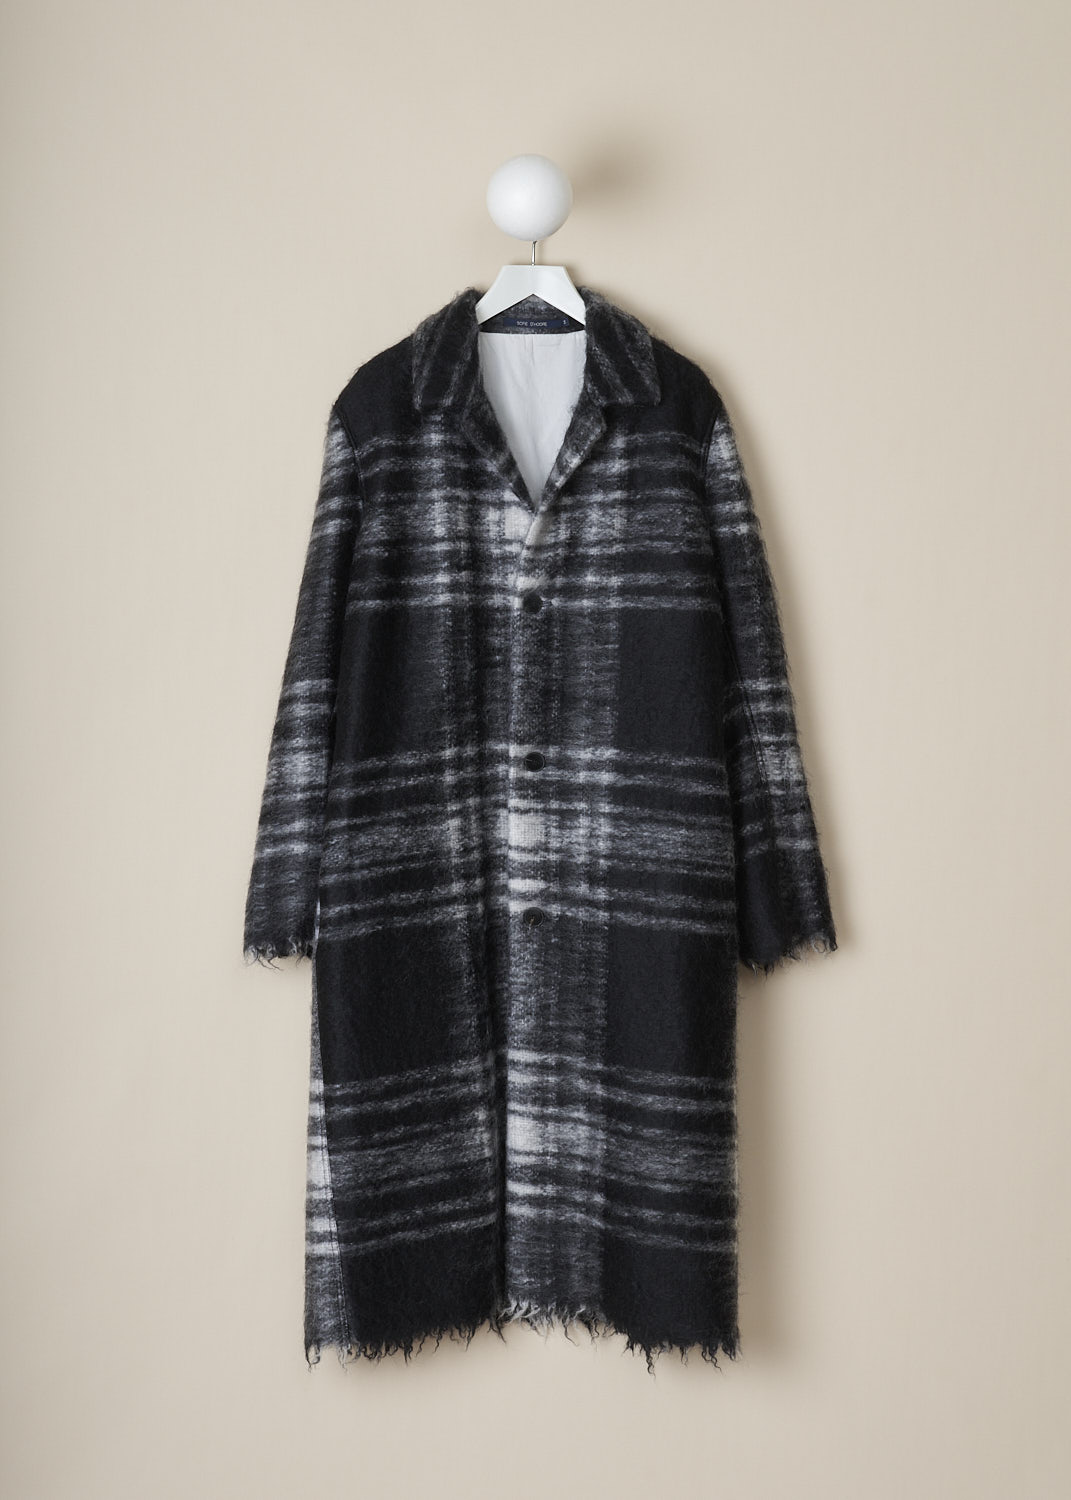 SOFIE Dâ€™HOORE, LONG BLACK AND WHITE TARTAN CAY COAT, CAY_WOMO_BLACK_TARTAN, Black, White, Print, Front, This long black and white tartan Cay coat has a spread collar and a front button closure. The long sleeves have slightly dropped shoulders and a raw edged cuff. In the front, the coat has on-seam slanted pockets. The coat has a straight raw edged hemline. The coat is fully lined and has a single inner pocket. 
